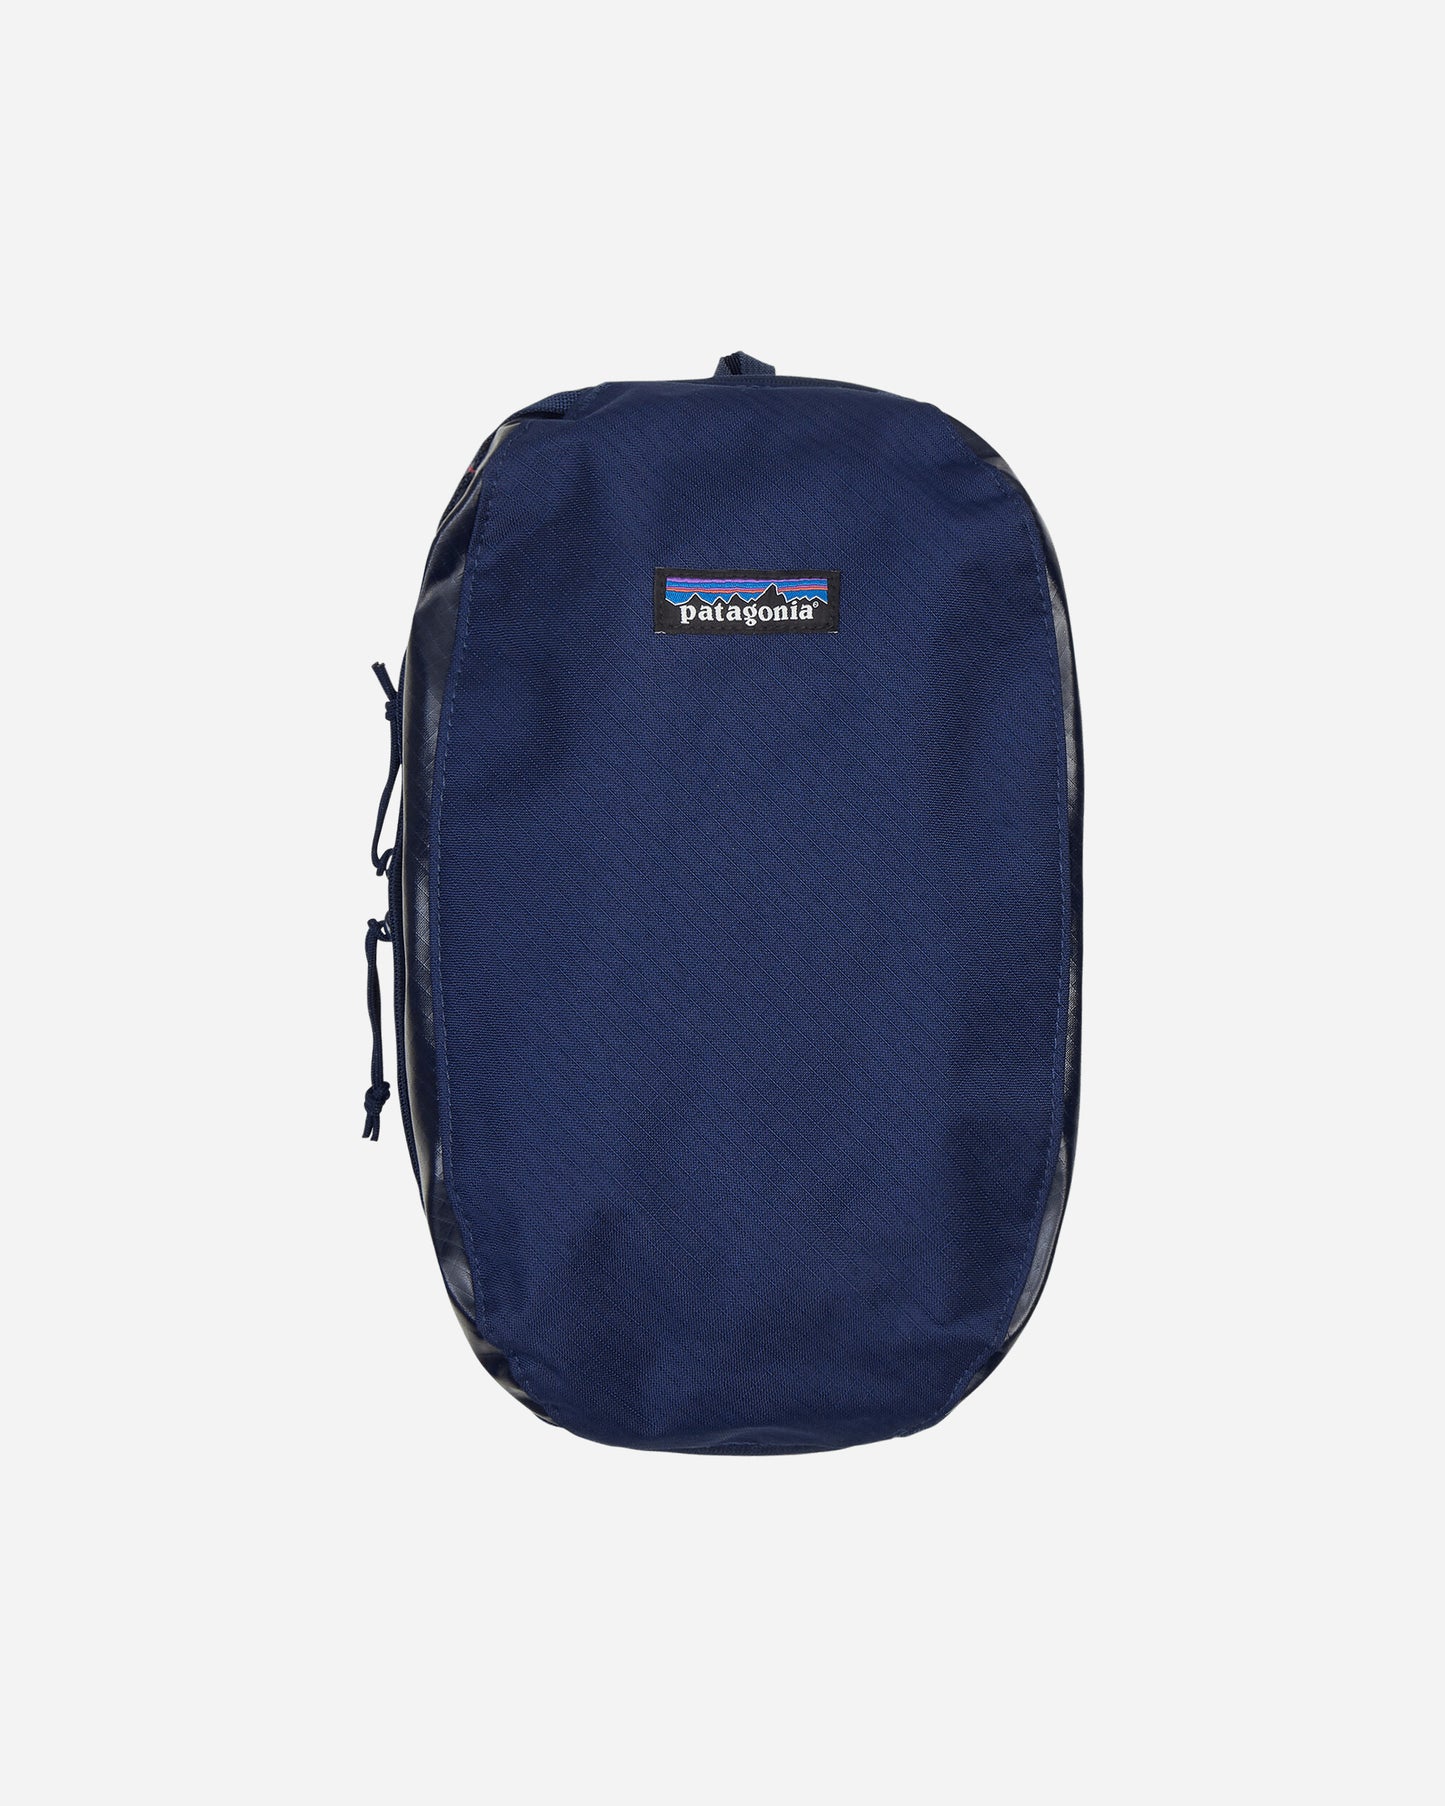 Patagonia Black Hole Cube - Medium Classic Navy Bags and Backpacks Pouches 49366 CNY